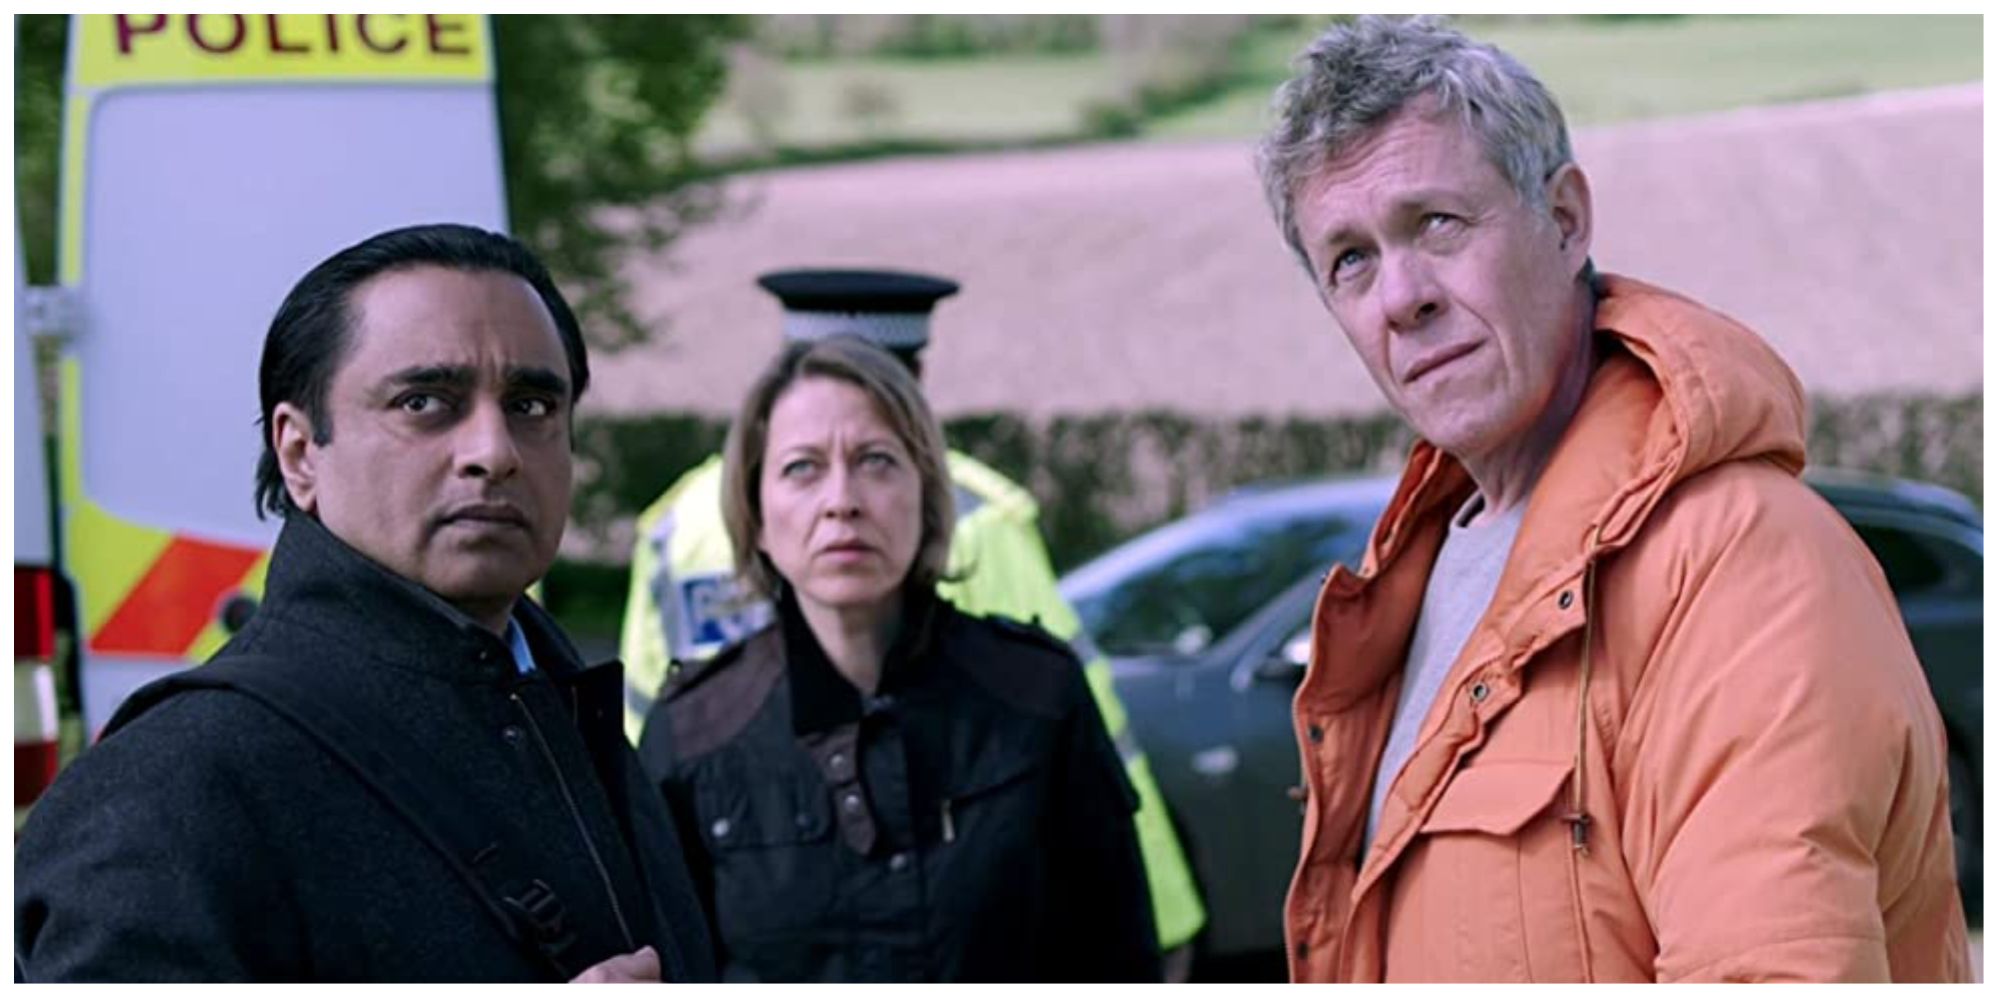 Police Detectives in Unforgotten looking up at something offscreen with grave expressions on their faces